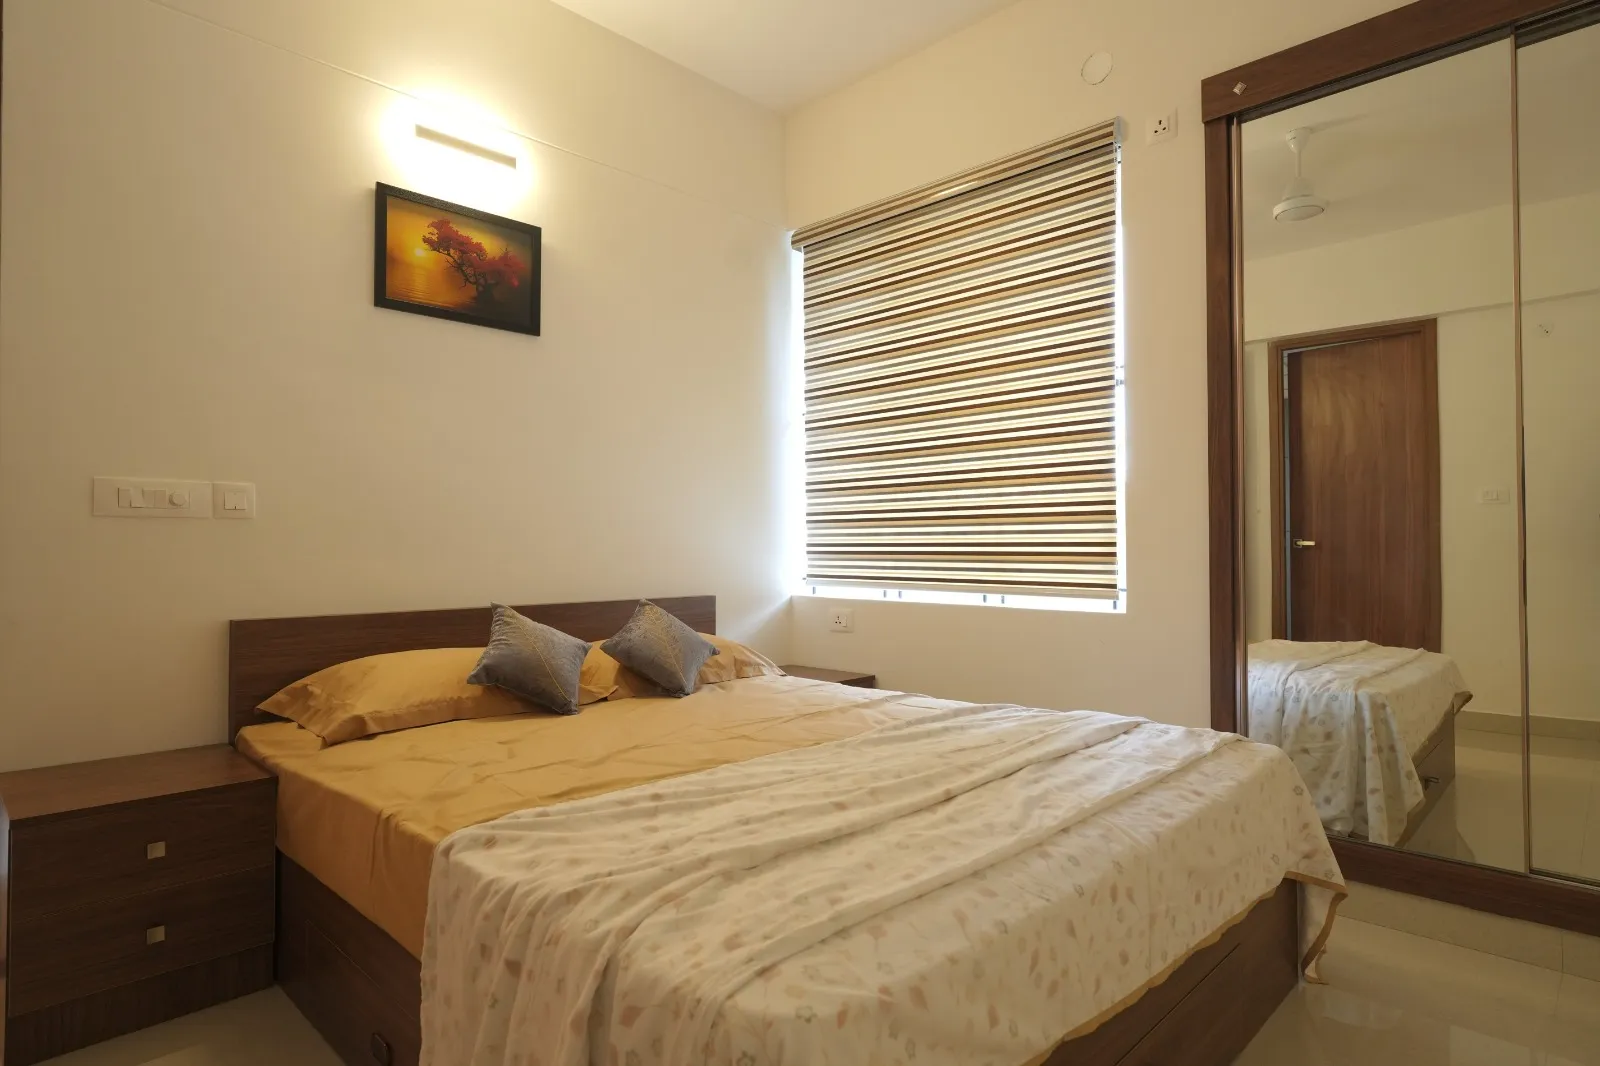 spacious bedrooms in a flats in trivandrum